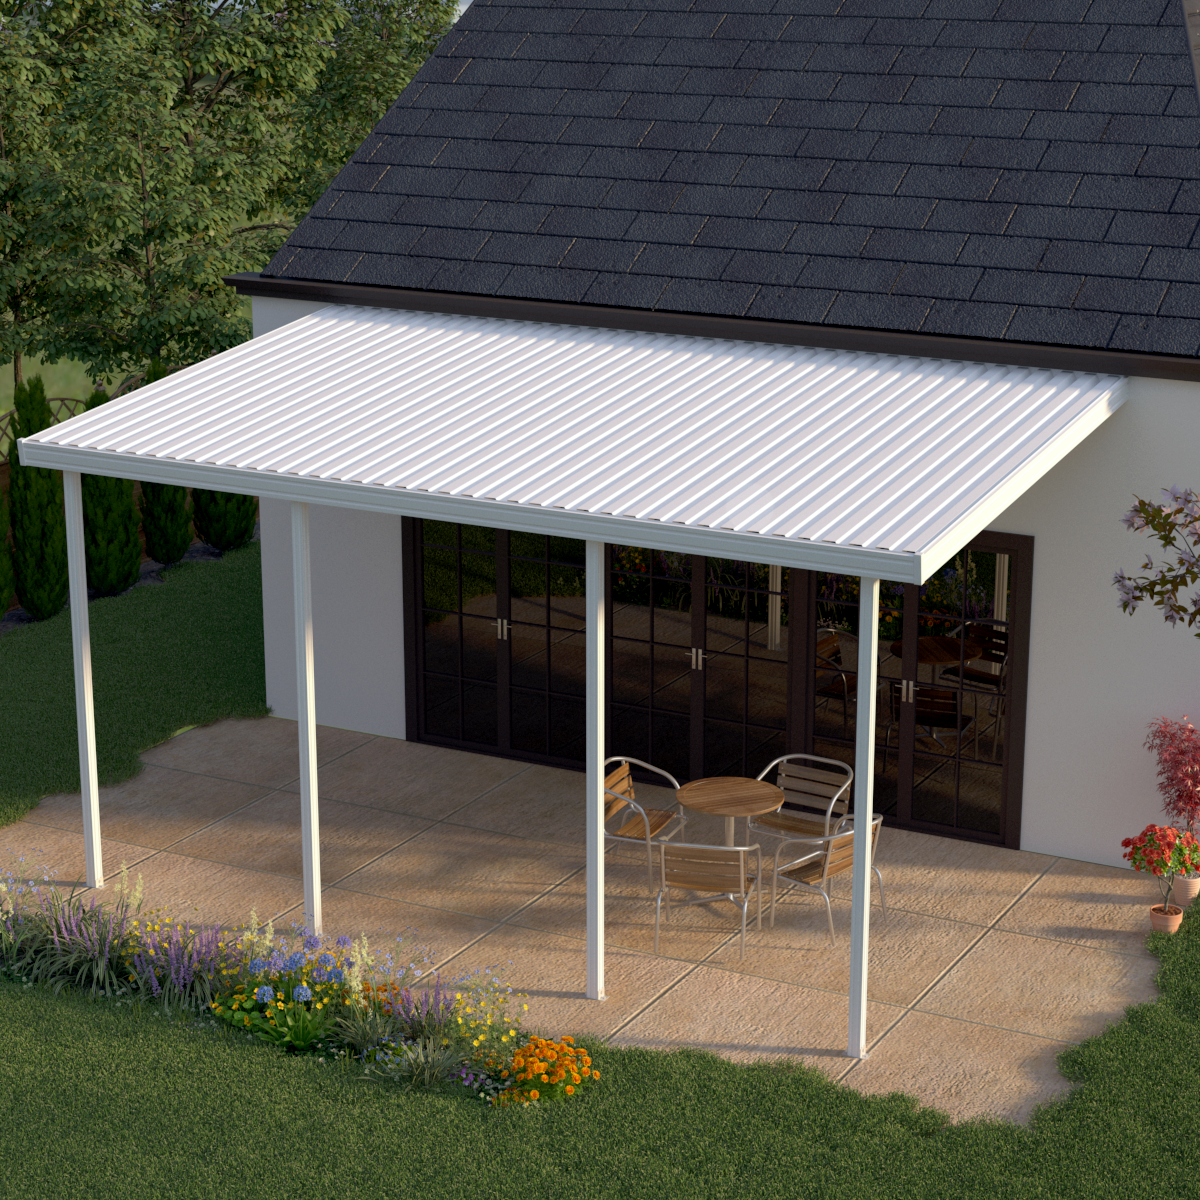 Heritage Patios 16 ft. x 9 ft. White Aluminum Attached Patio Cover (4